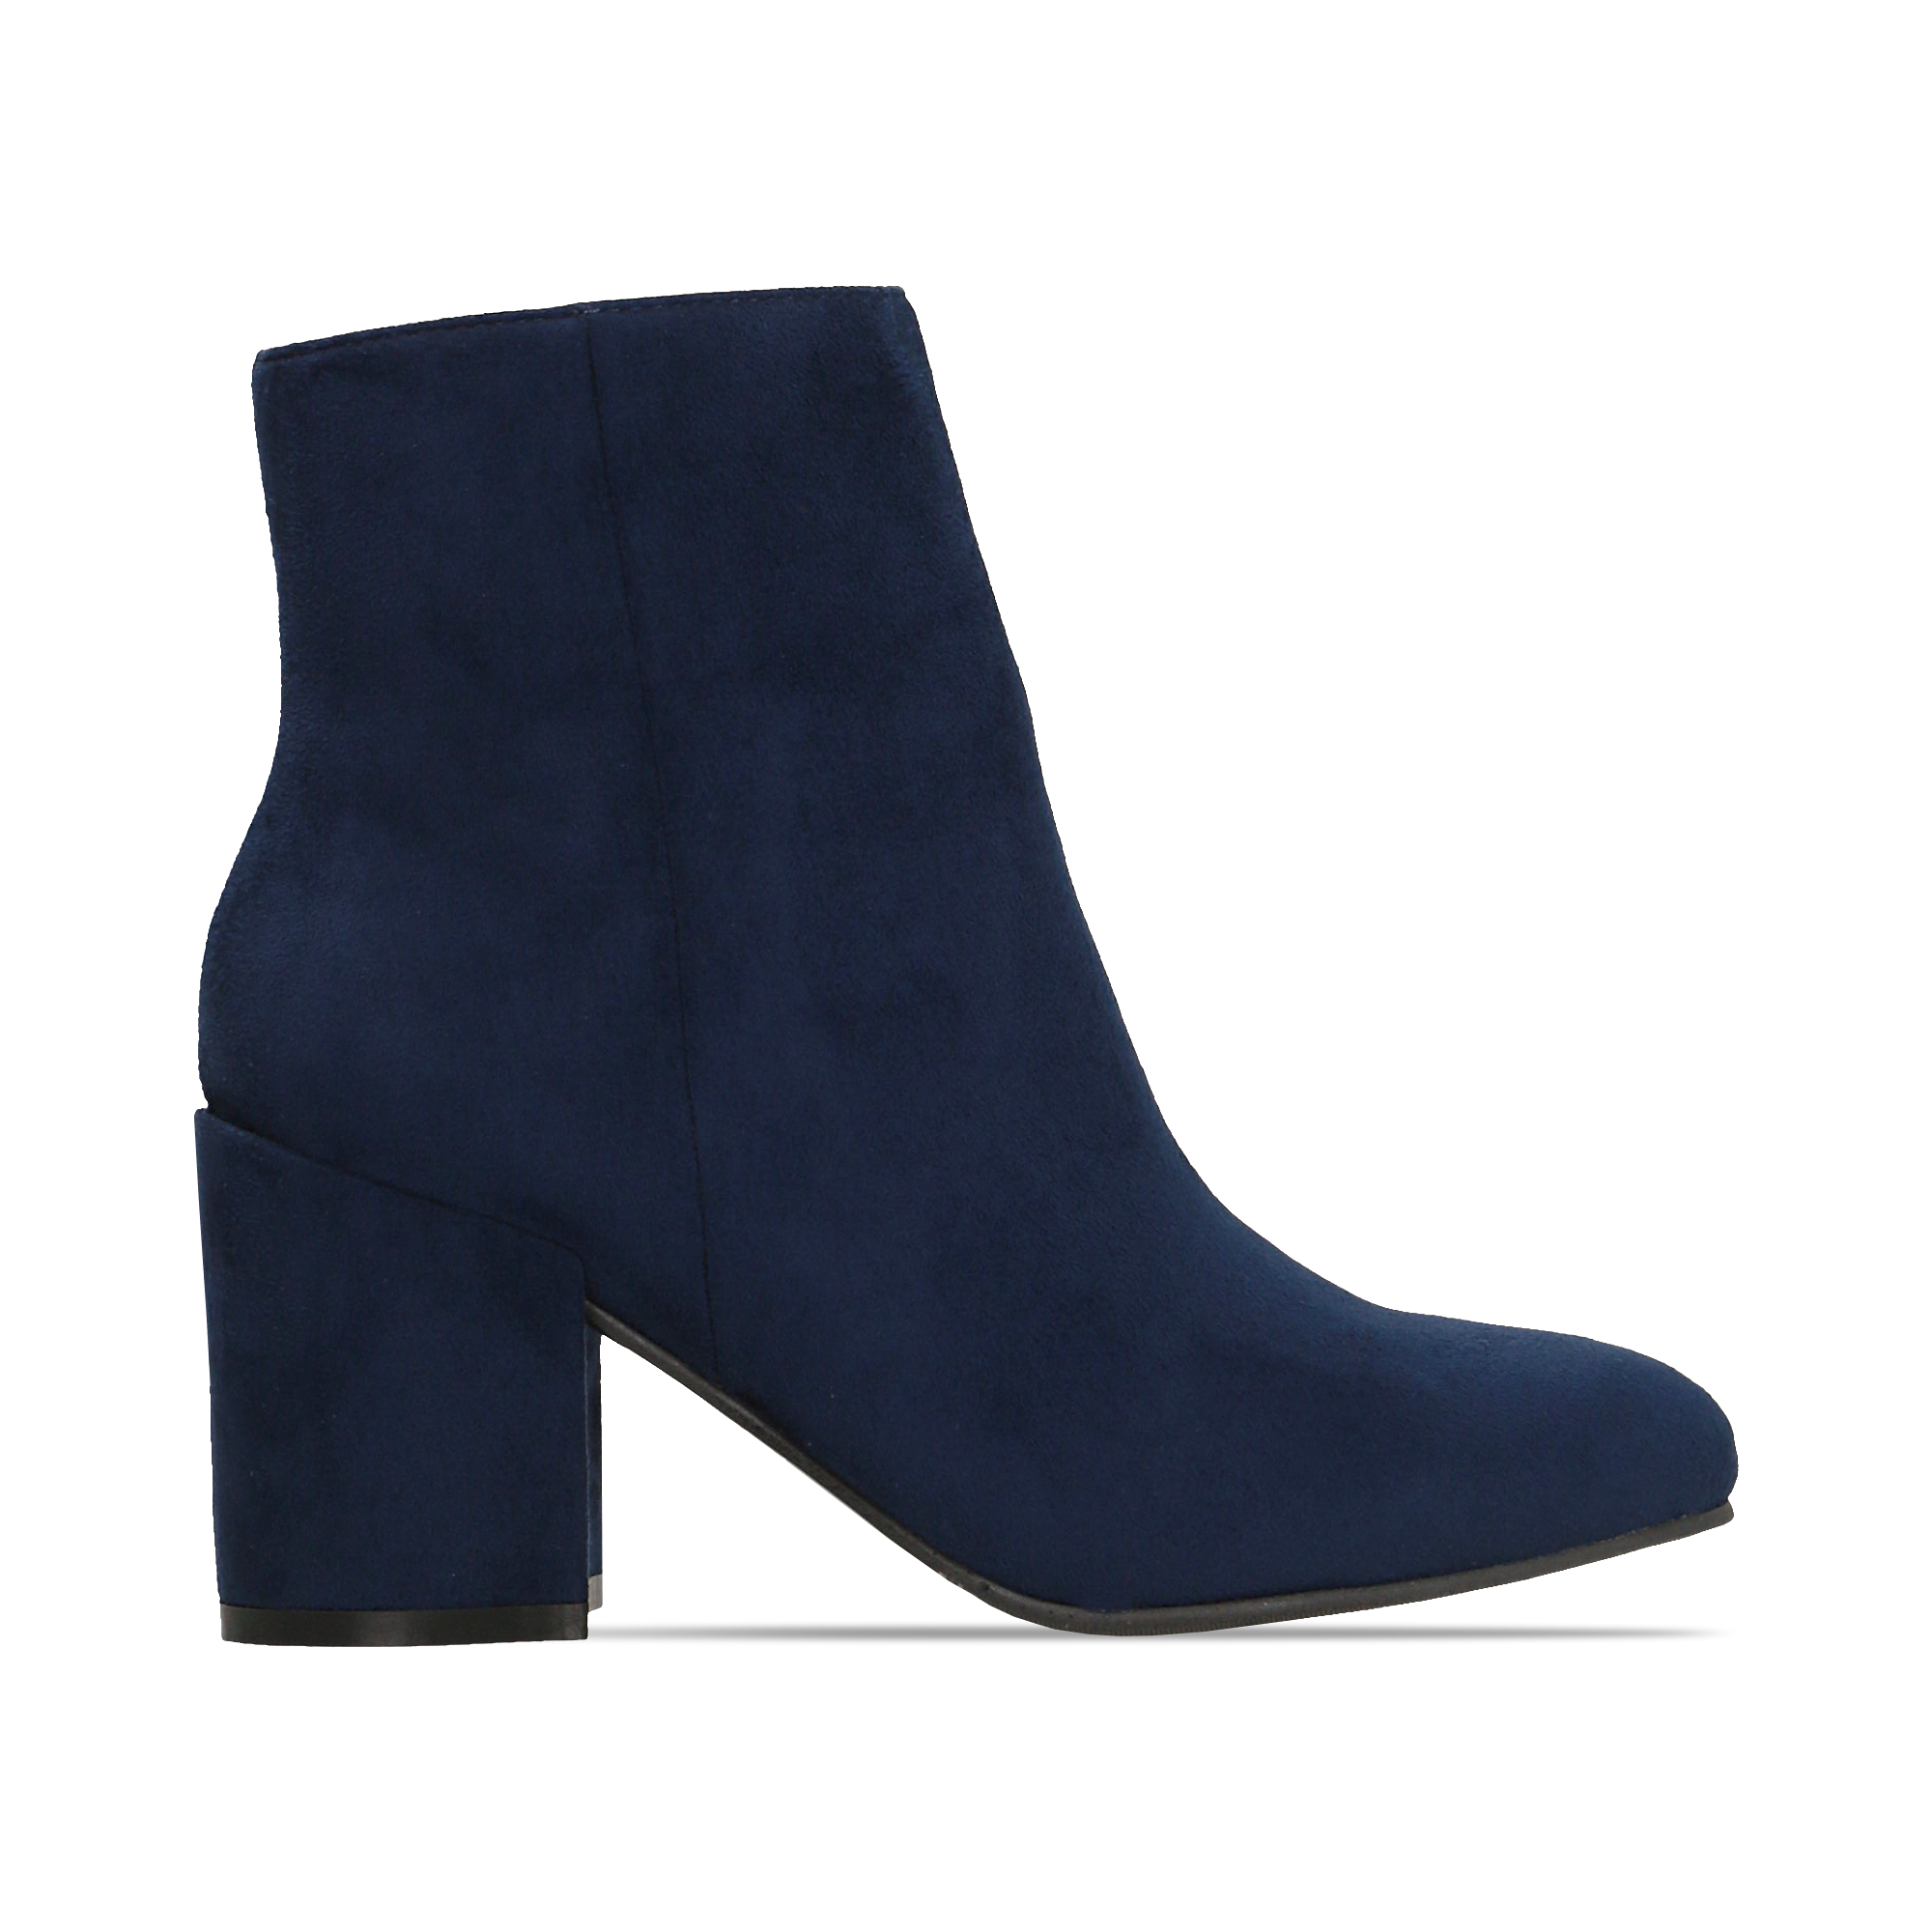 Ankle boots blu in microfibra, tacco 7,5 cm | Primadonna Collection